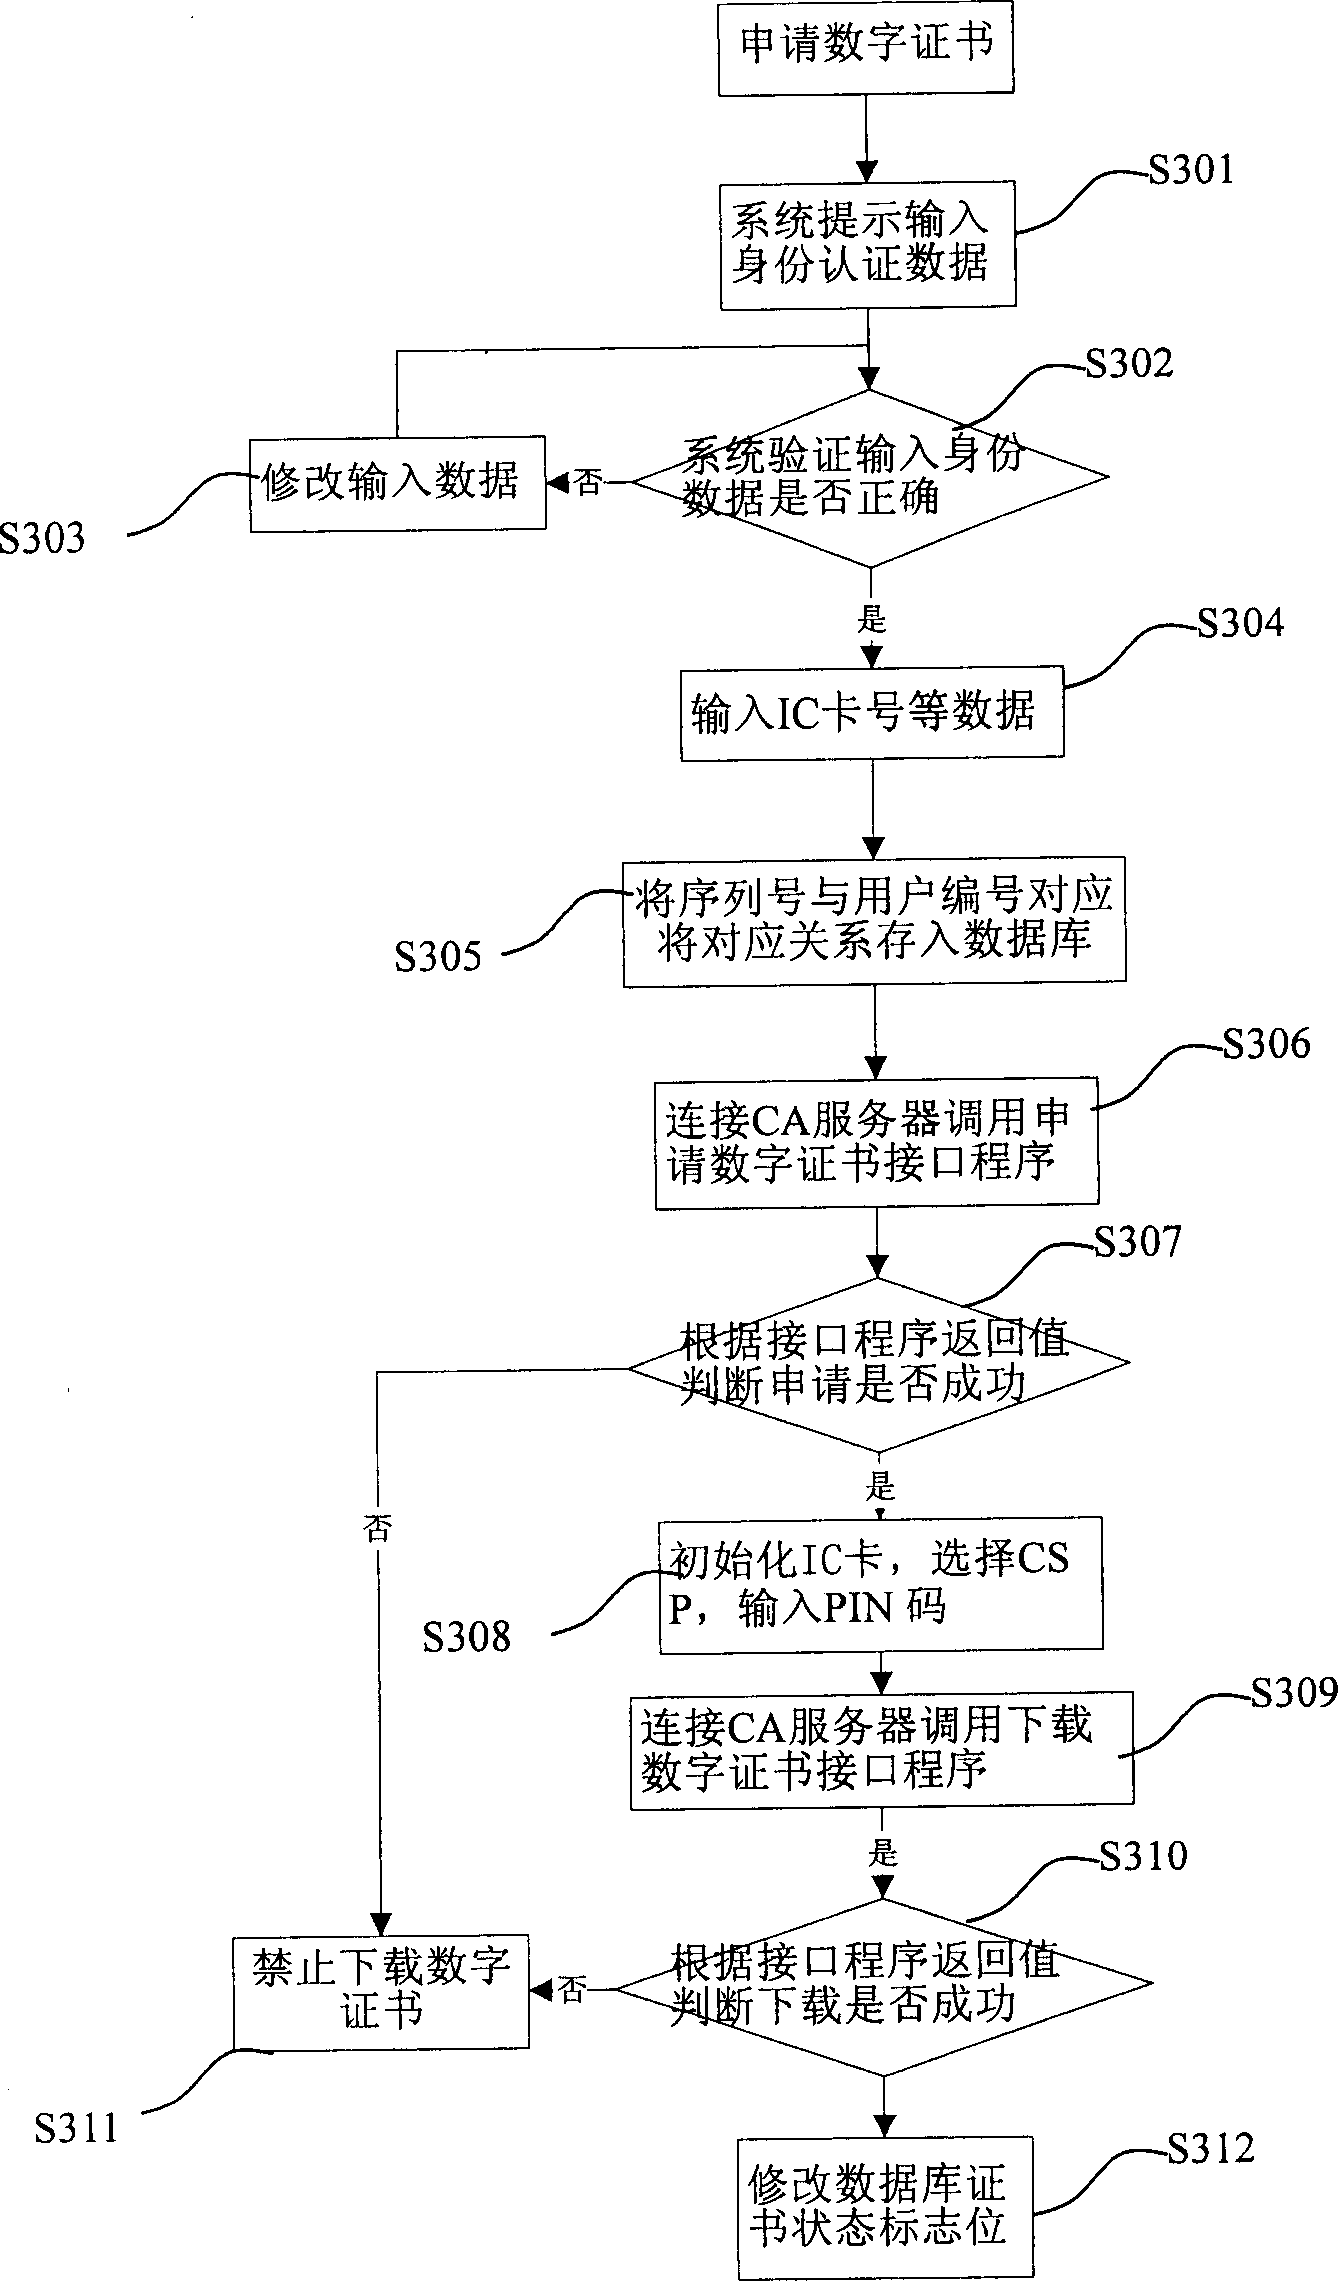 Method and system for authenticating or enciphering data by using IC card